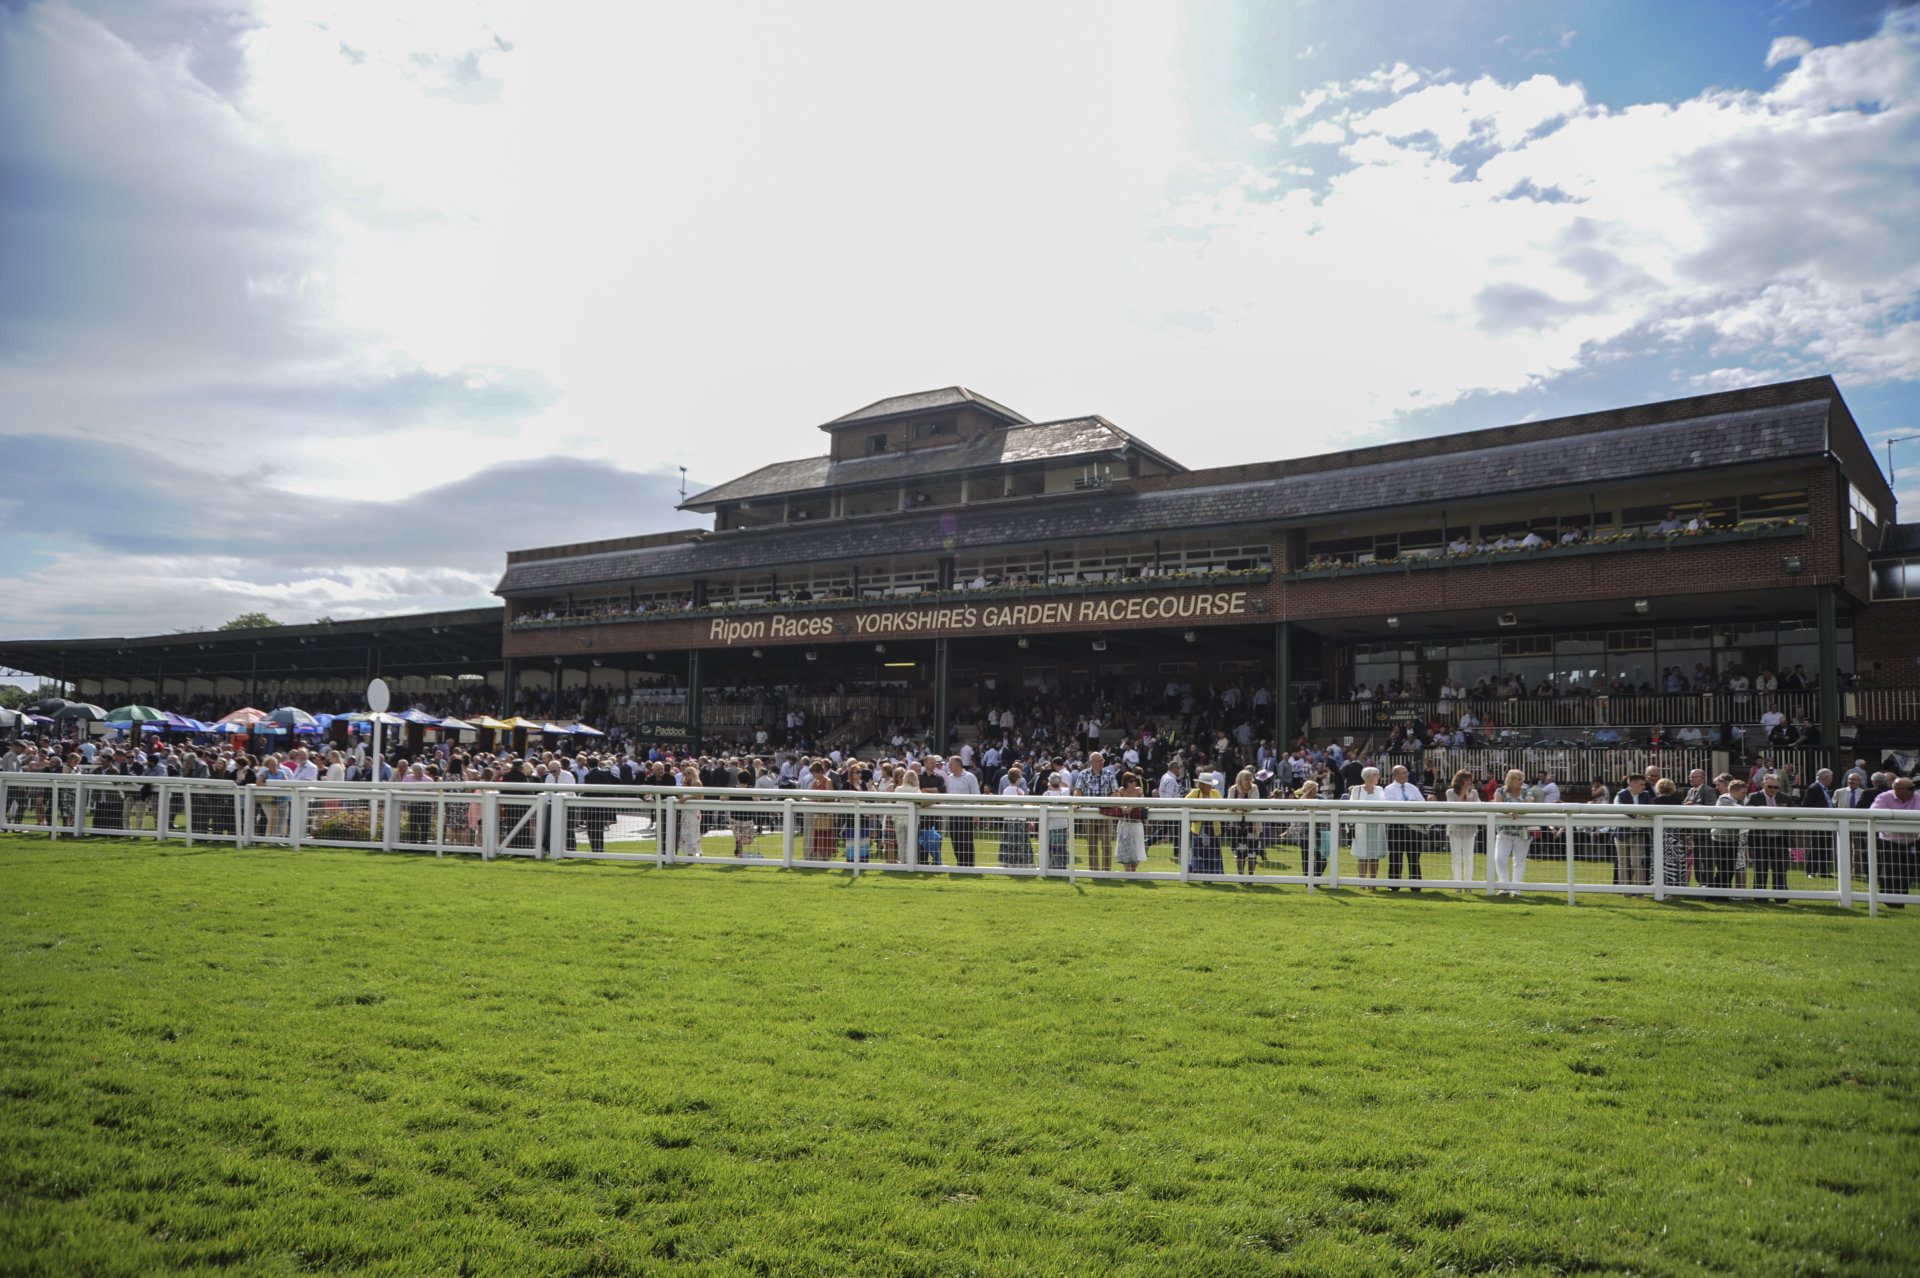 I've Been Snapped Ripon 19 07 2014 Copyright GO RACING YORKSHIRE